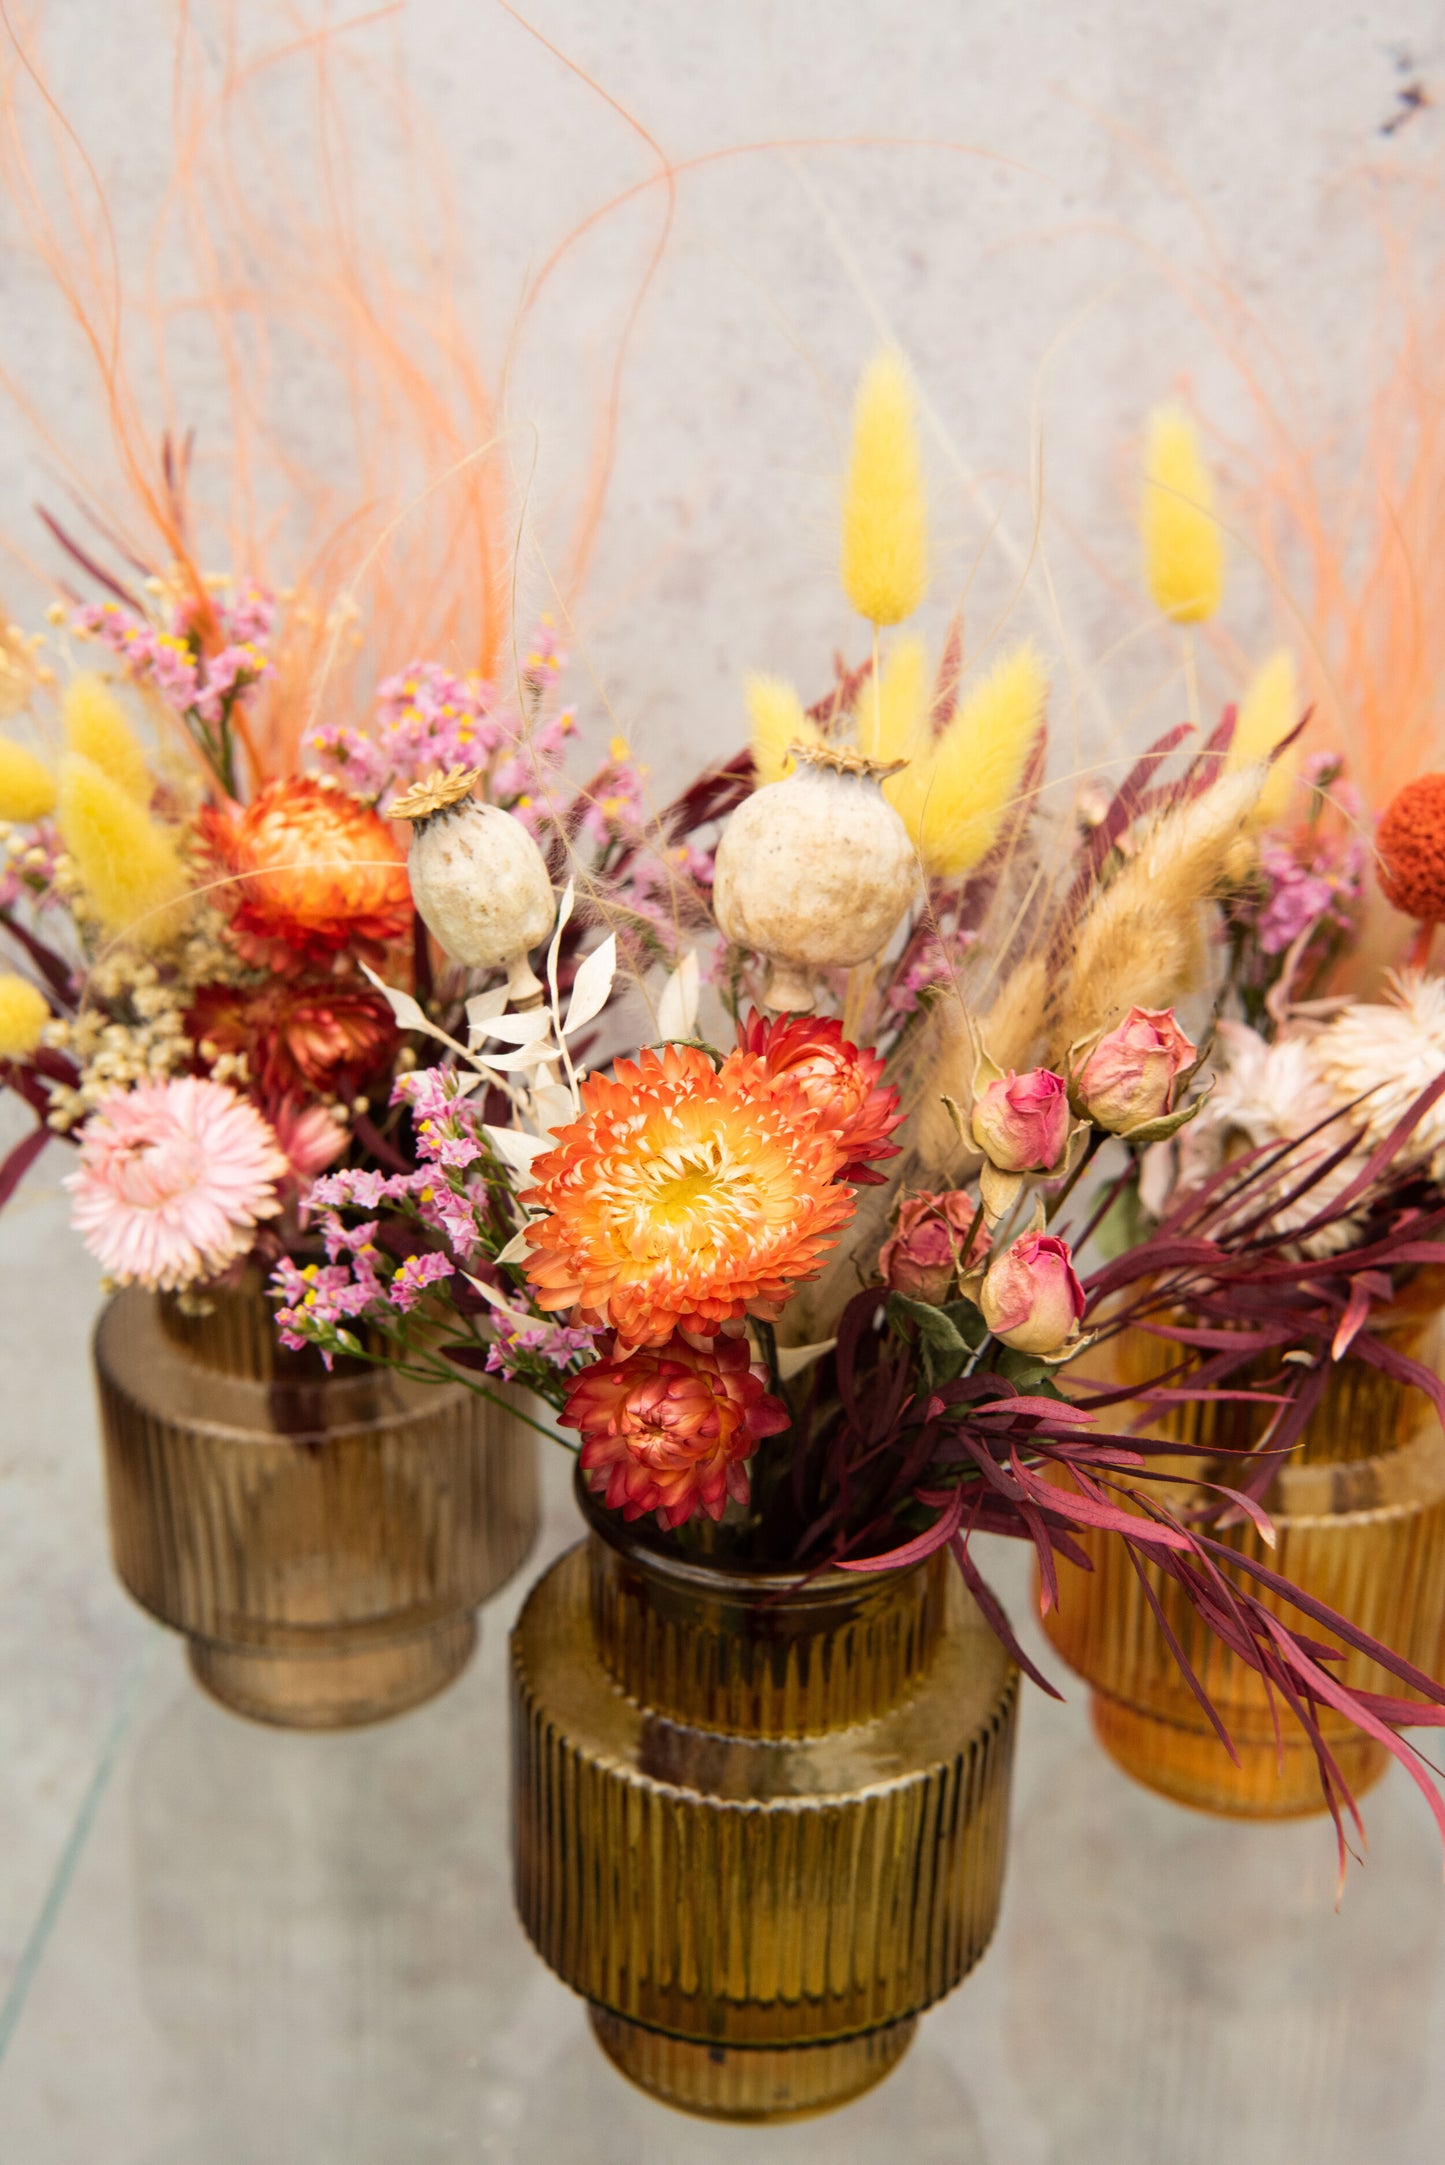 MIXED BOTTLES WITH DRIED FLOWERS